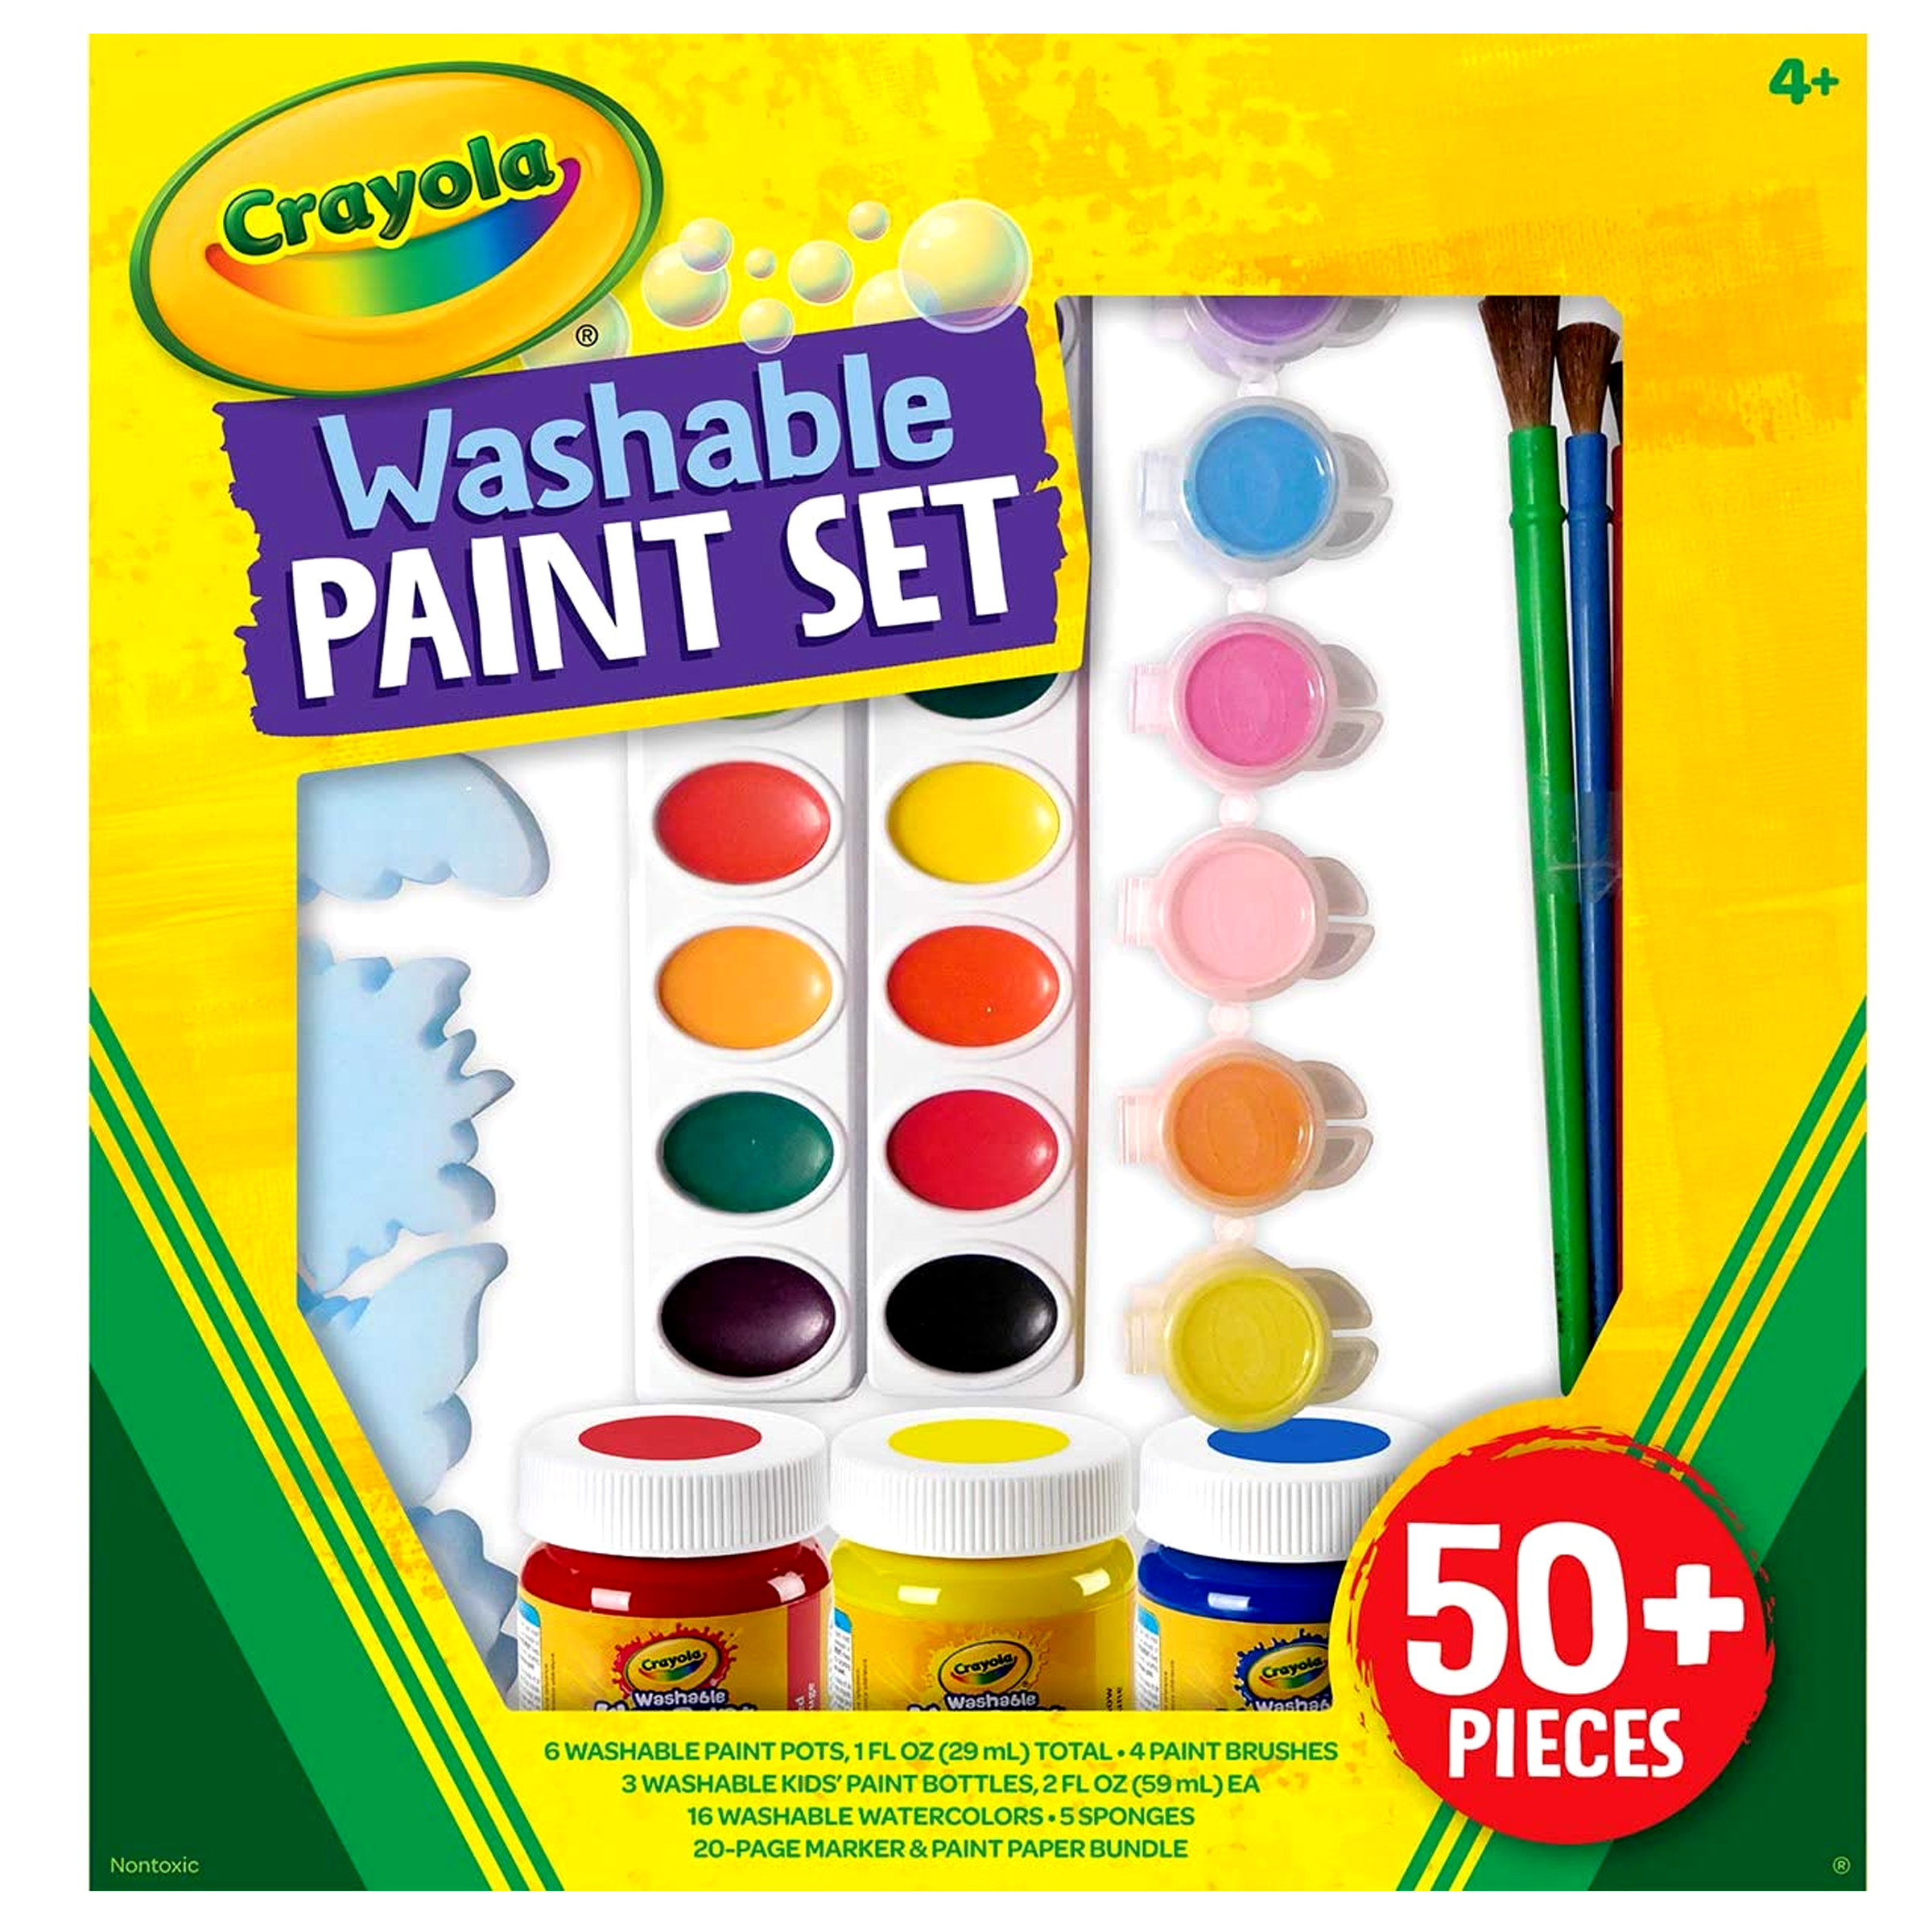 Crayola Washable Paint Set, Over 50 Pieces, Gift for Kids